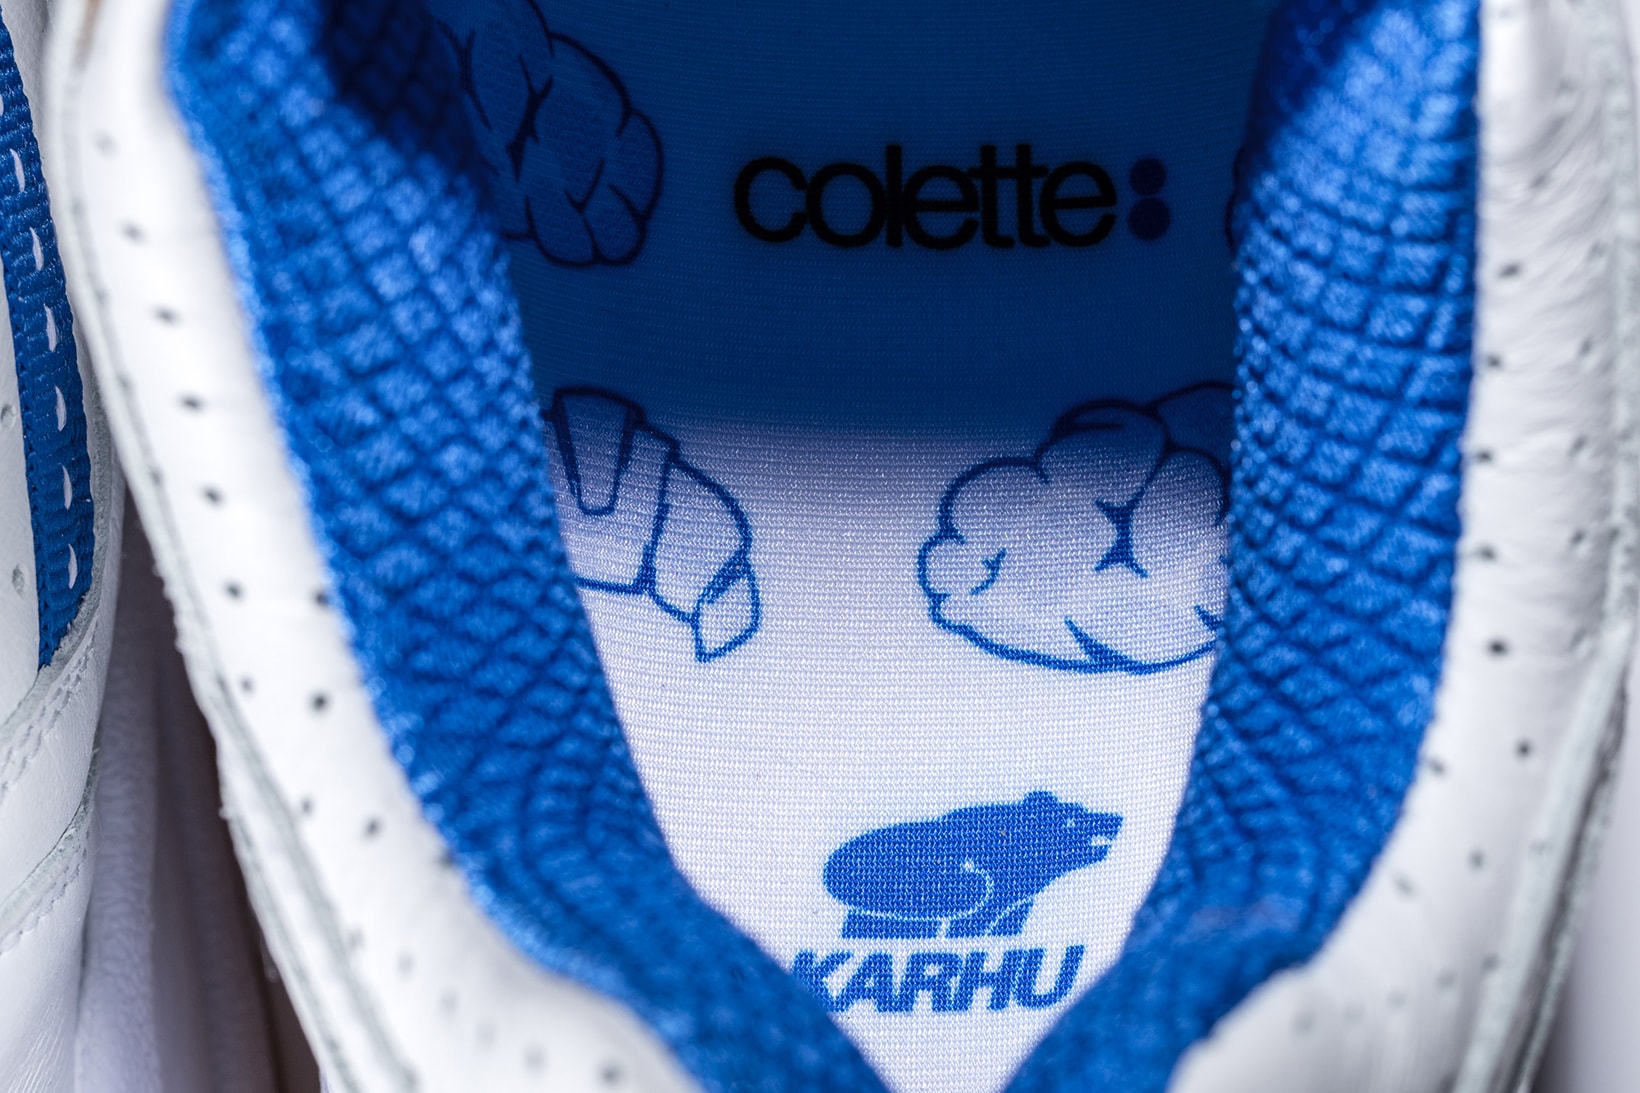 colette Karhu Fusion 2 0 Breaking Bread concepts release 2018 february 23 date info sneakers shoes footwear collaboration us united states america